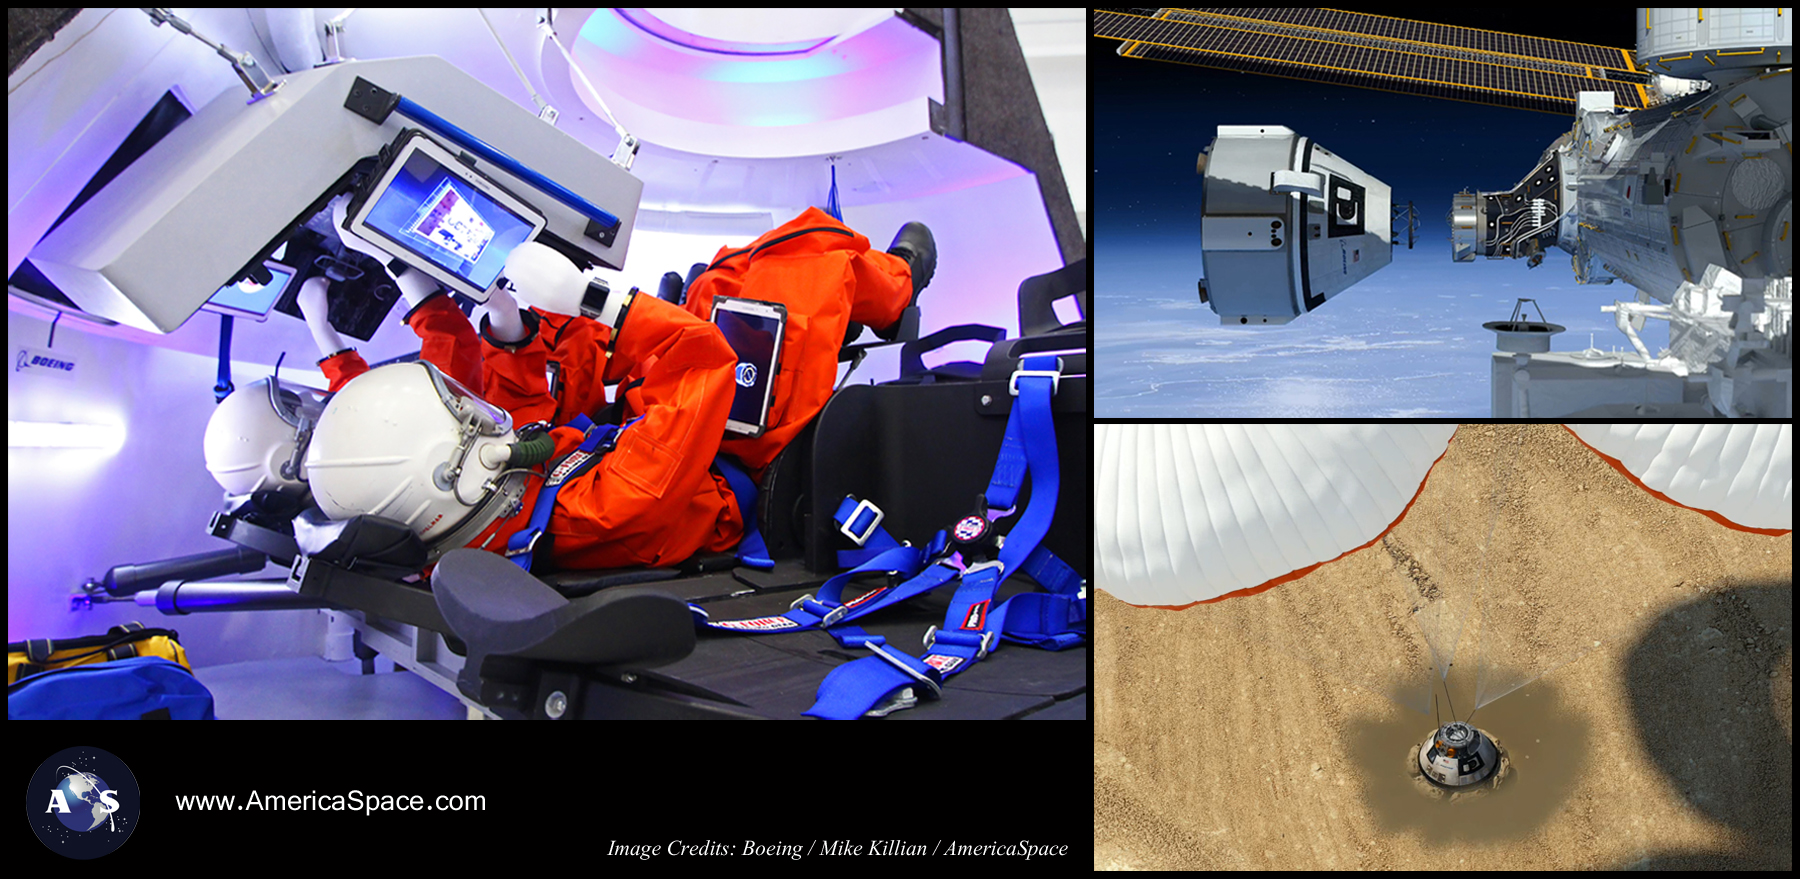 The Boeing Crew Space Transportation spacecraft, or CST-100 for short. Image Credits: Boeing / AmericaSpace / Mike Killian